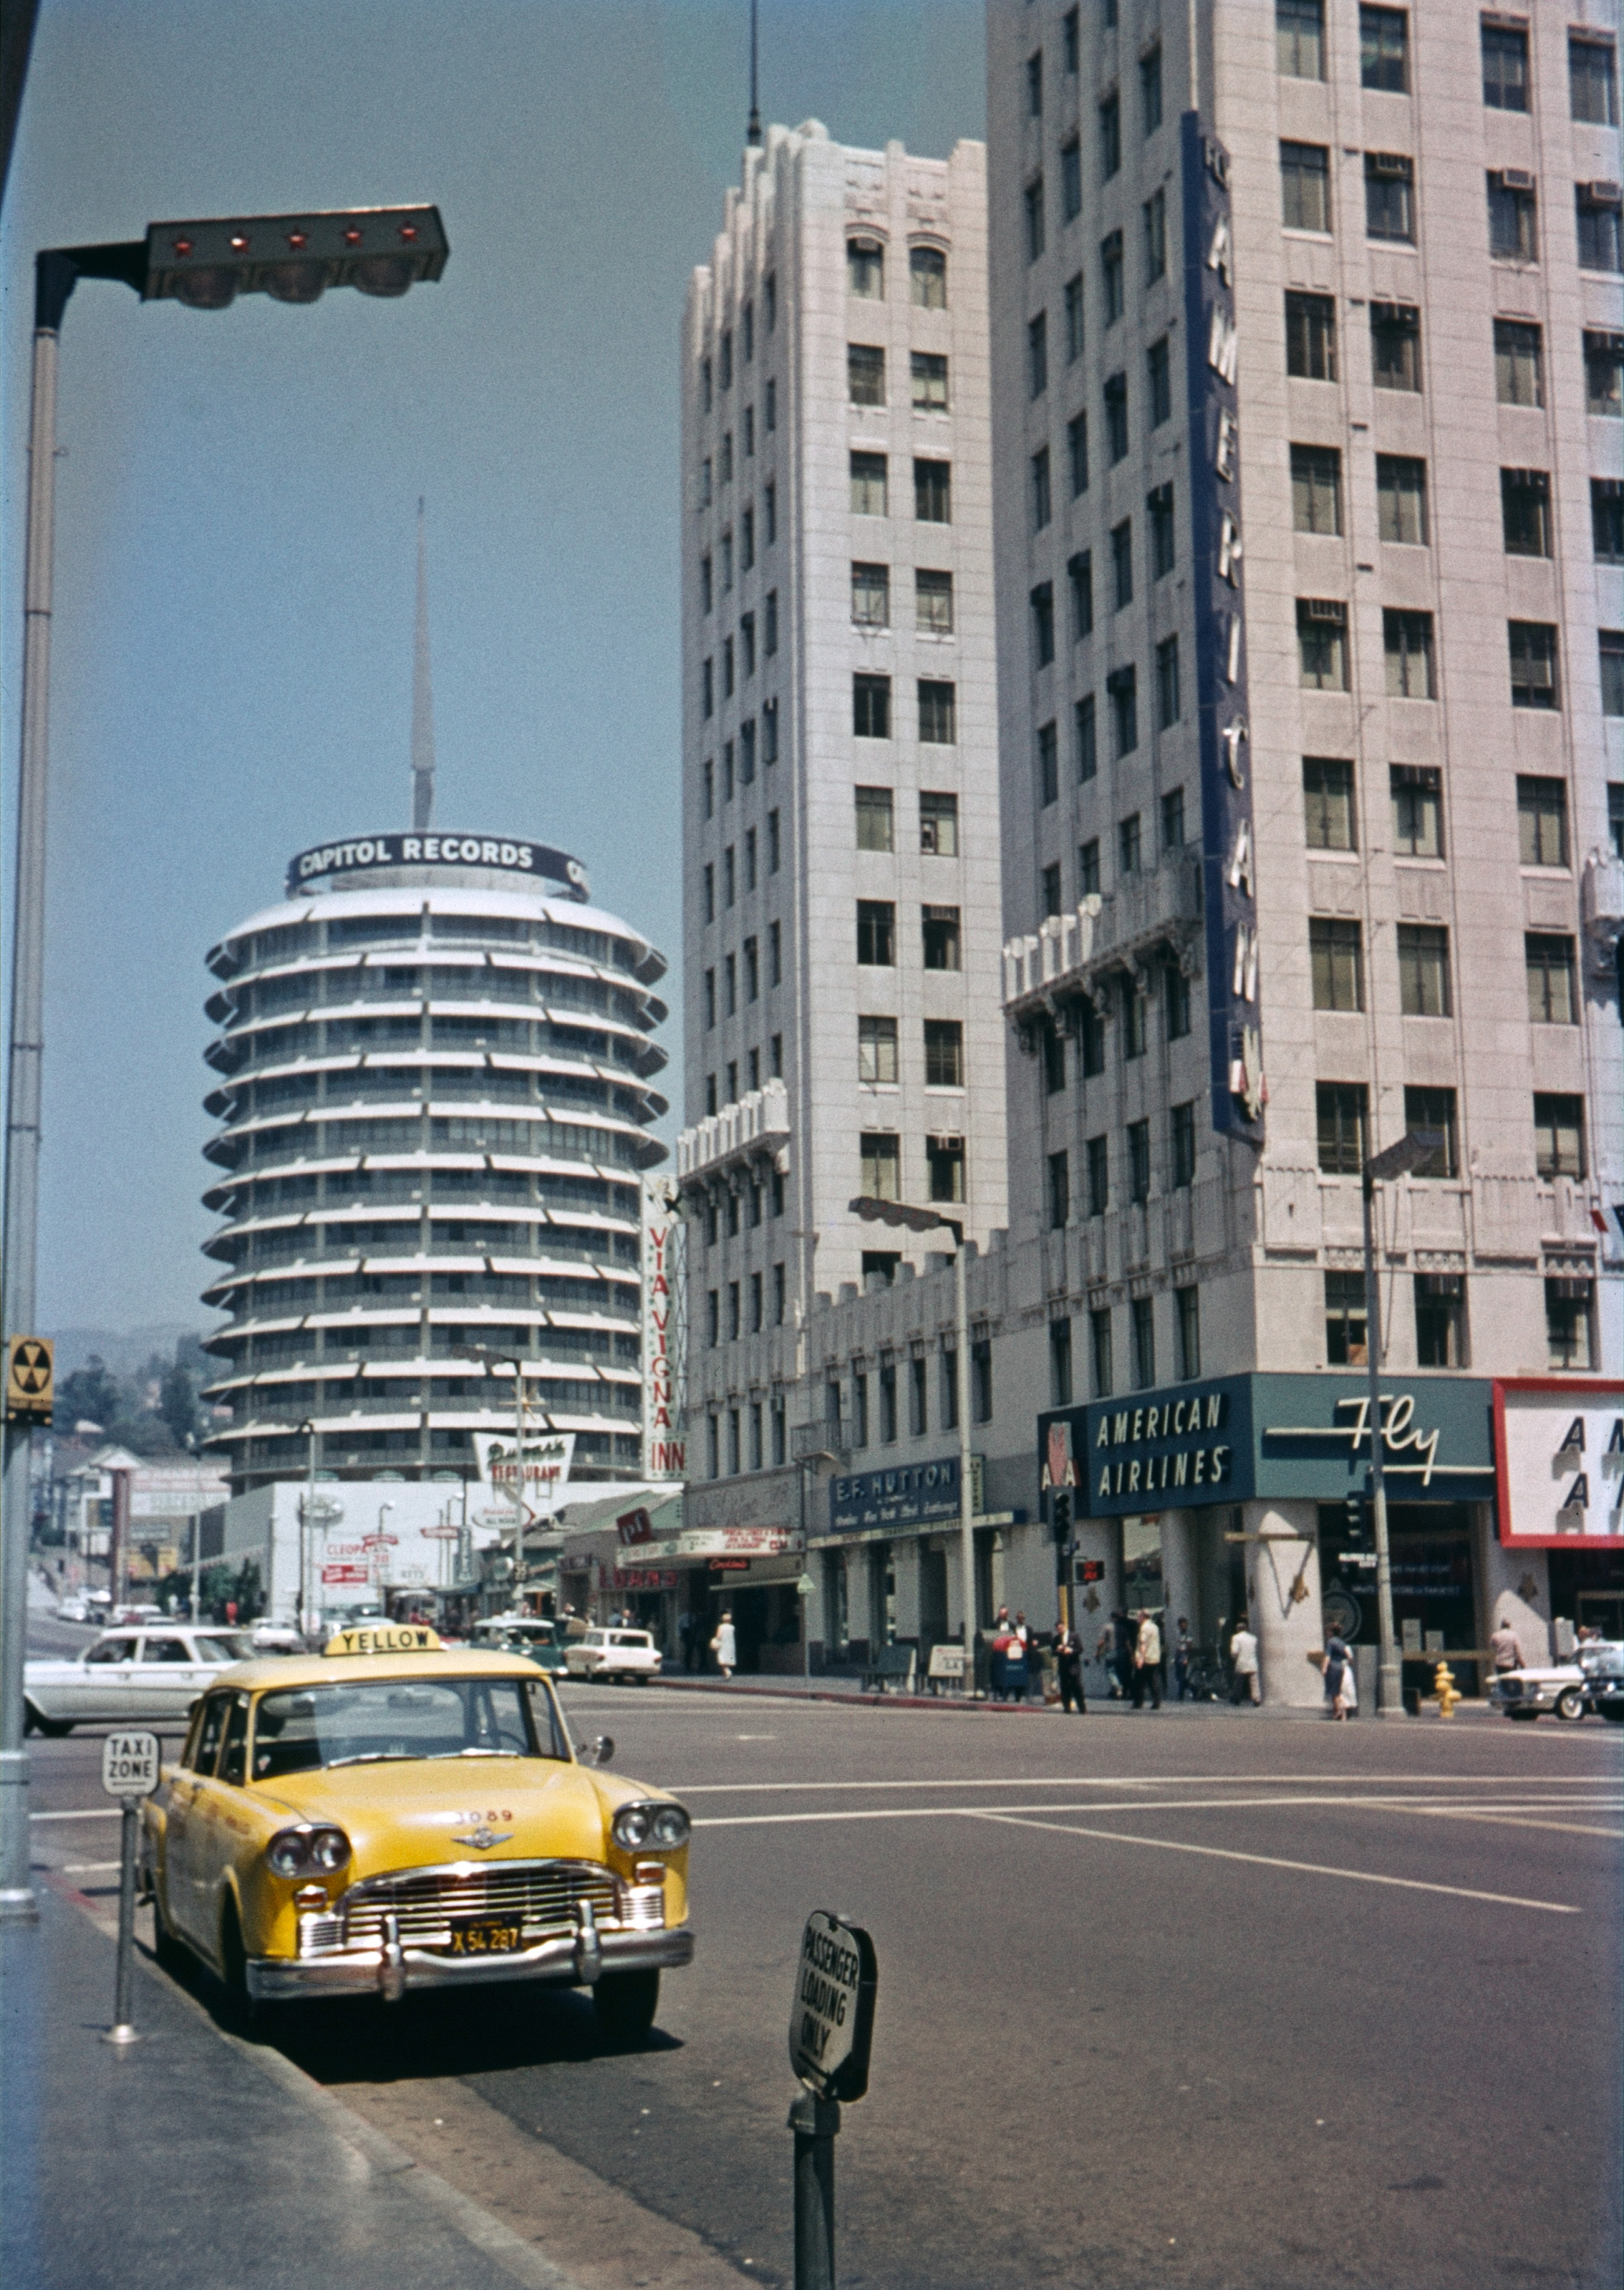 The historic Capitol Records Tower and Equitable Building dominate my slide from August 1963. But we're more interested in the Checker cab, the weird streetlight, the fallout shelter sign, the men in suits, the women in hats carrying purses and the Via Vigna Inn, aren't we? Less interesting: bizarre color issues courtesy Montgomery Ward-branded film. View full size.